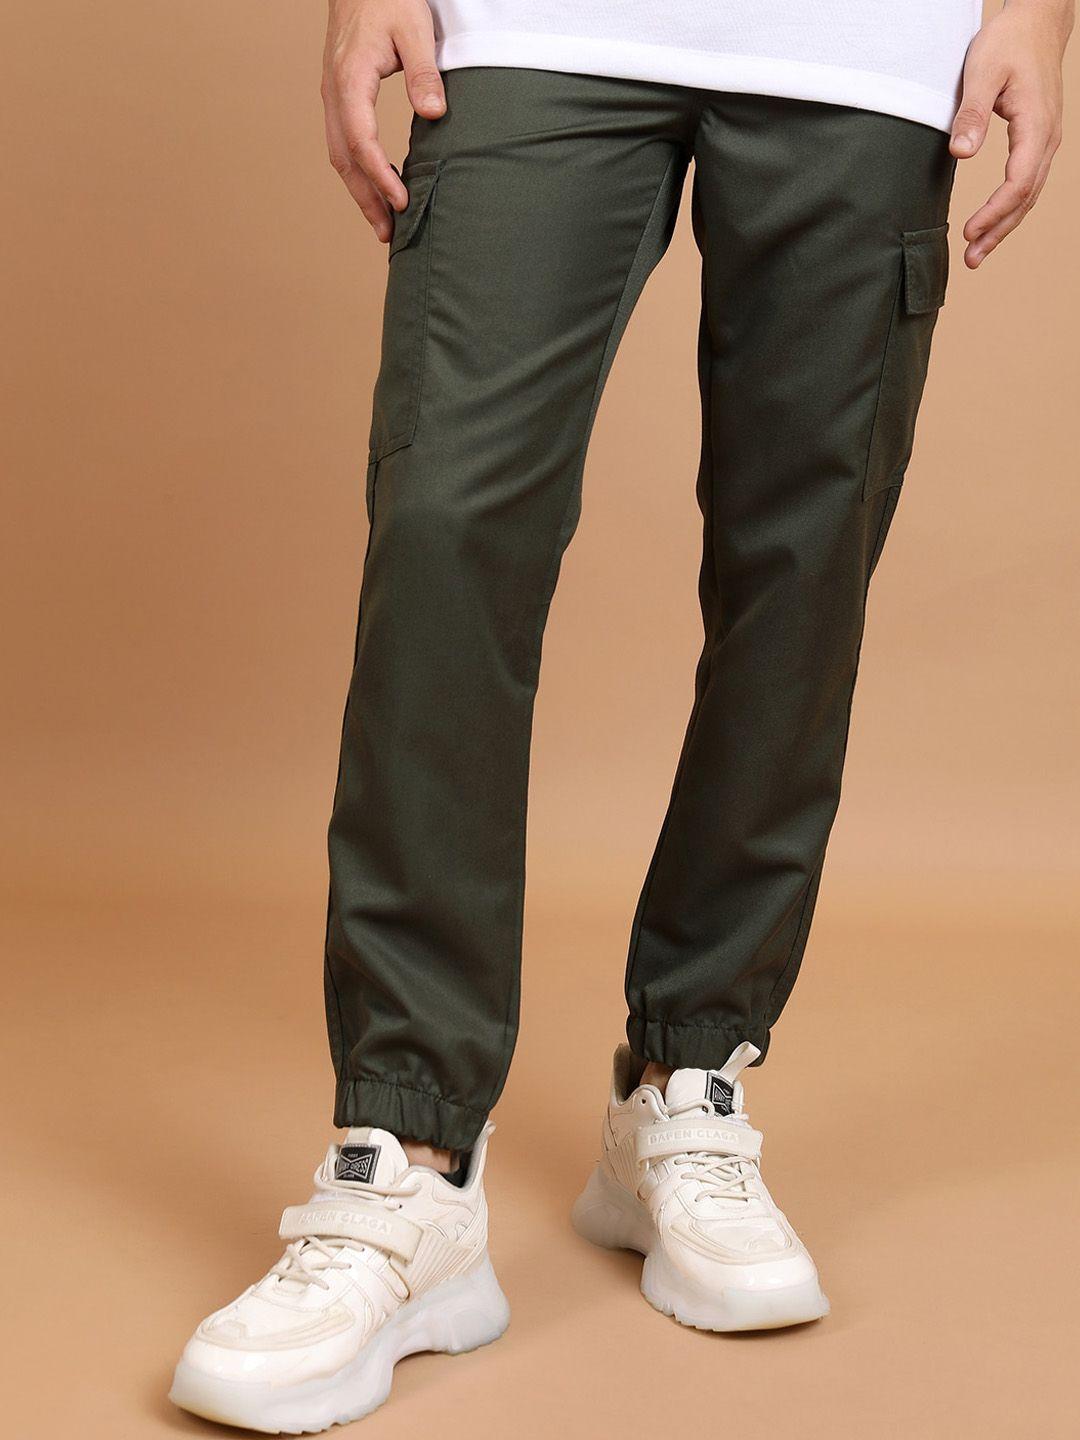 highlander-olive-green-men-mid-rise-cargo-style-joggers